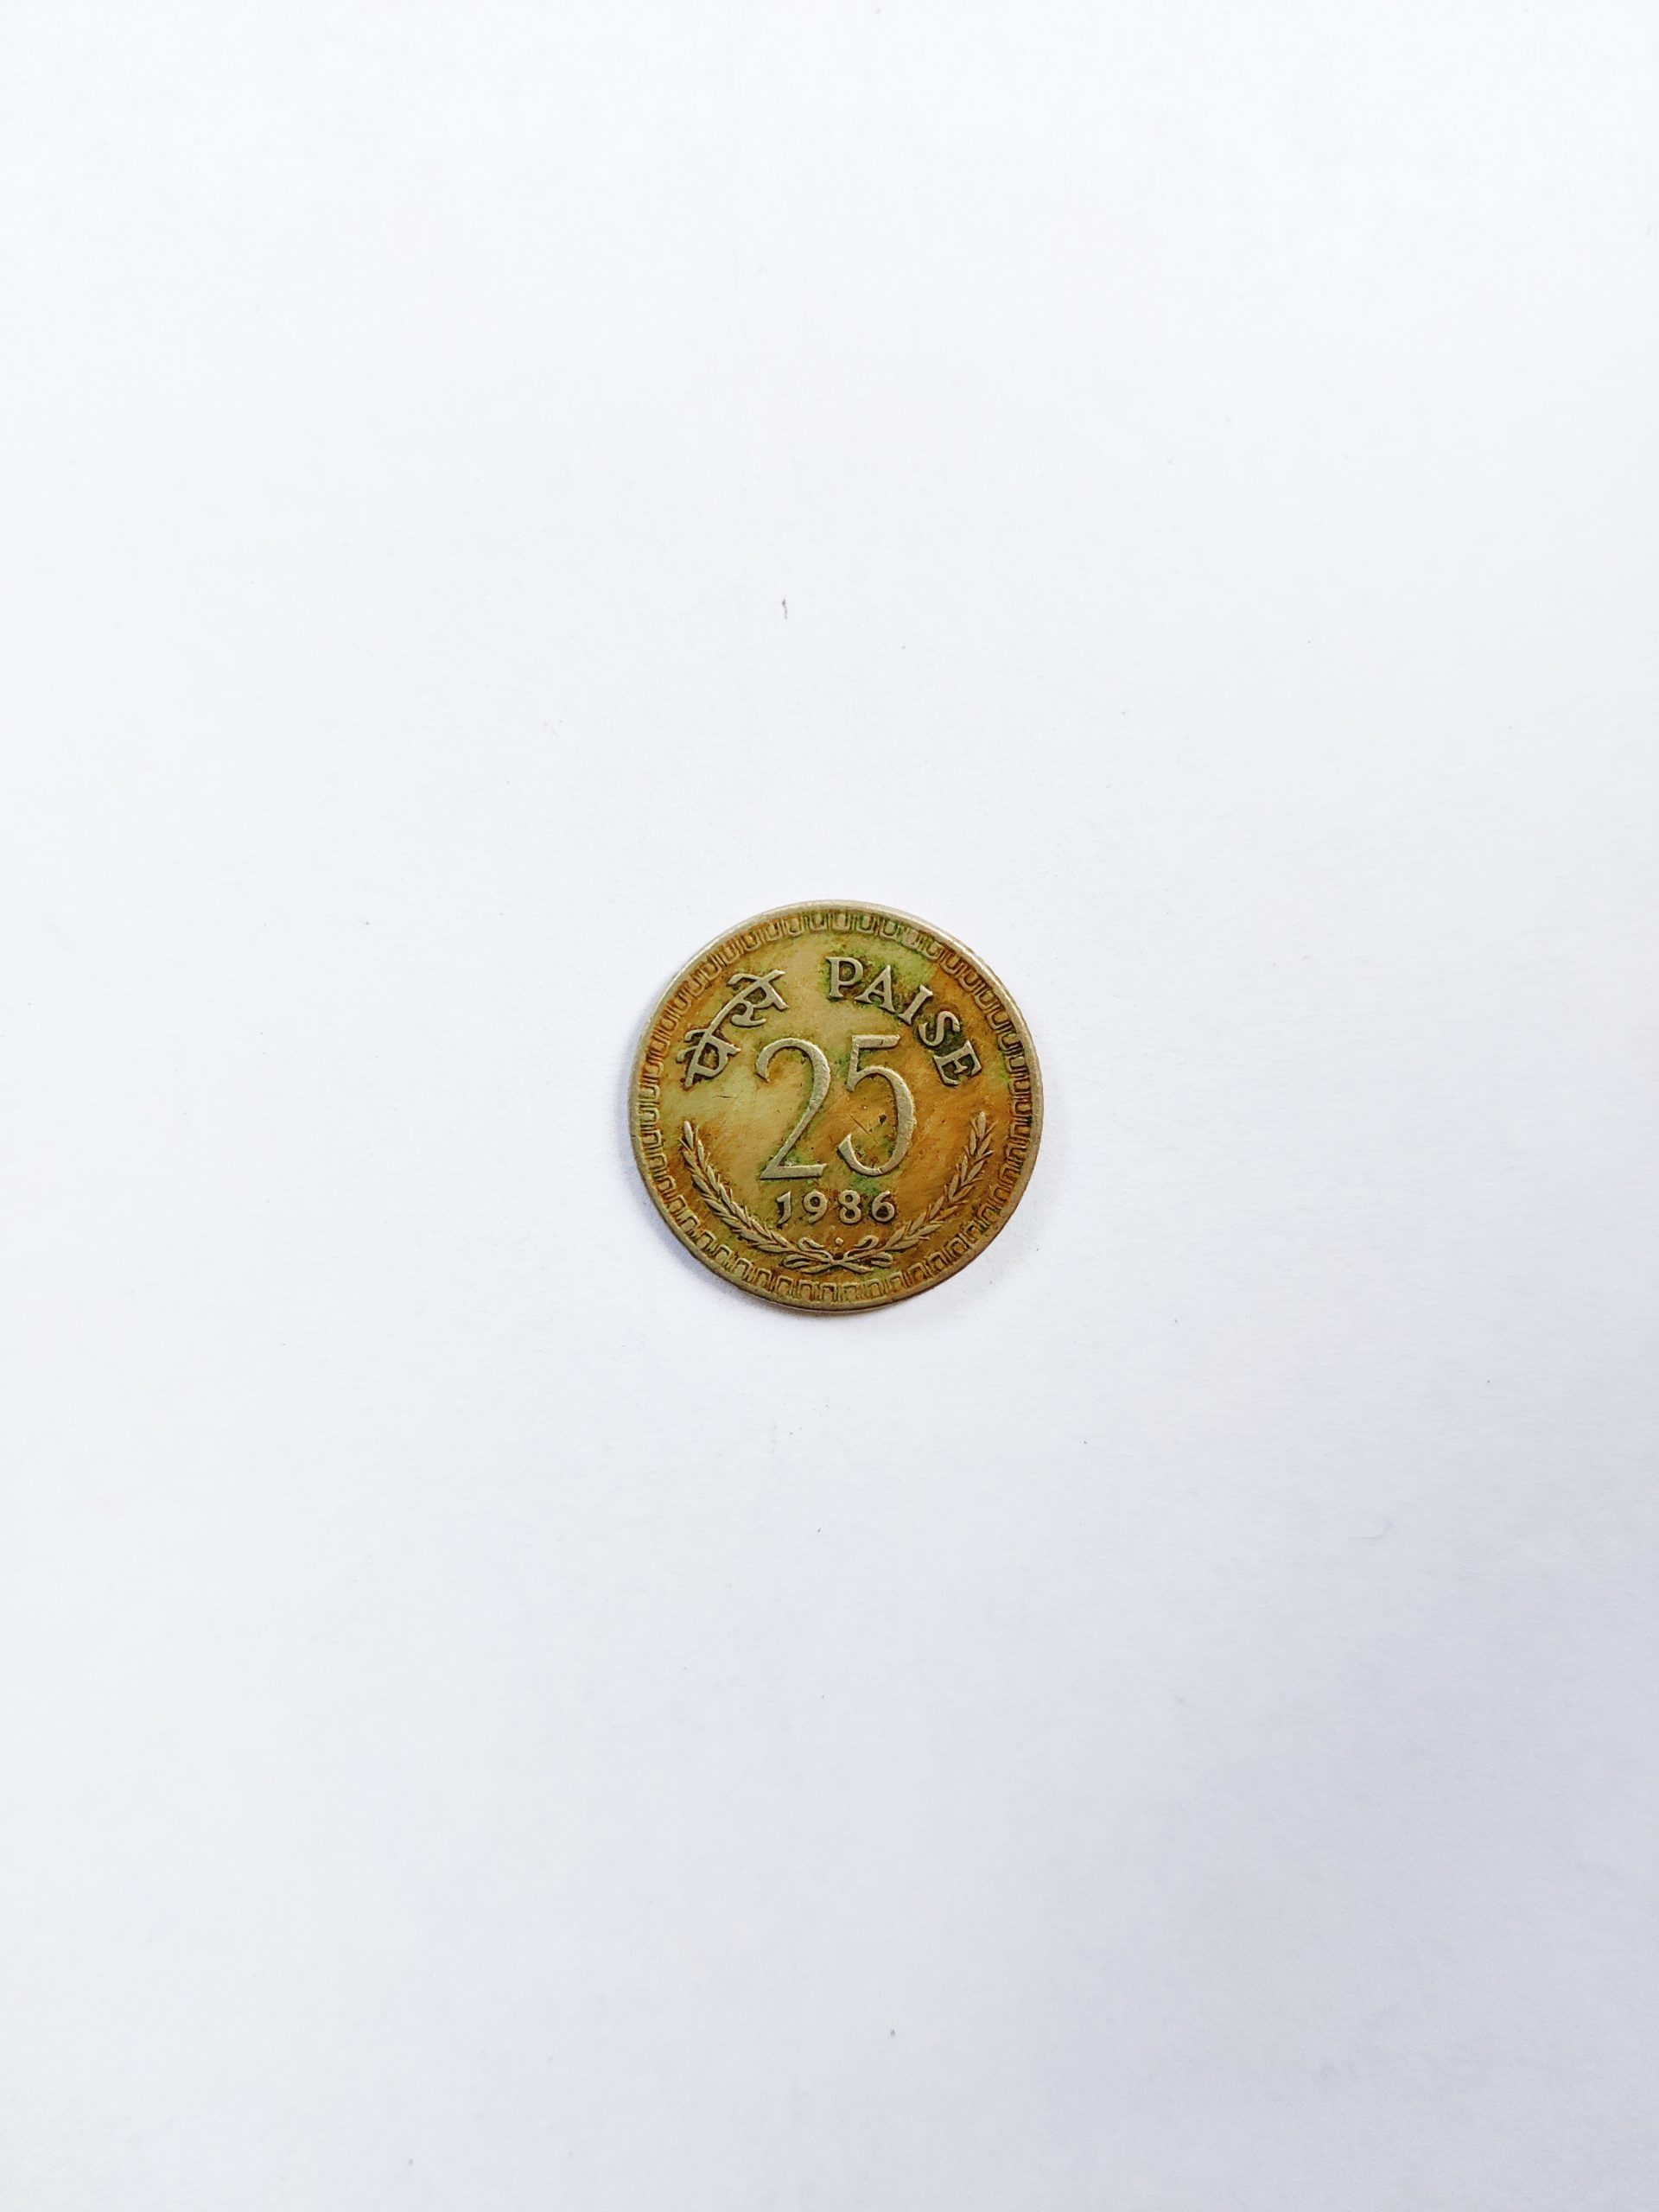 25 Paisa old Indian Coin